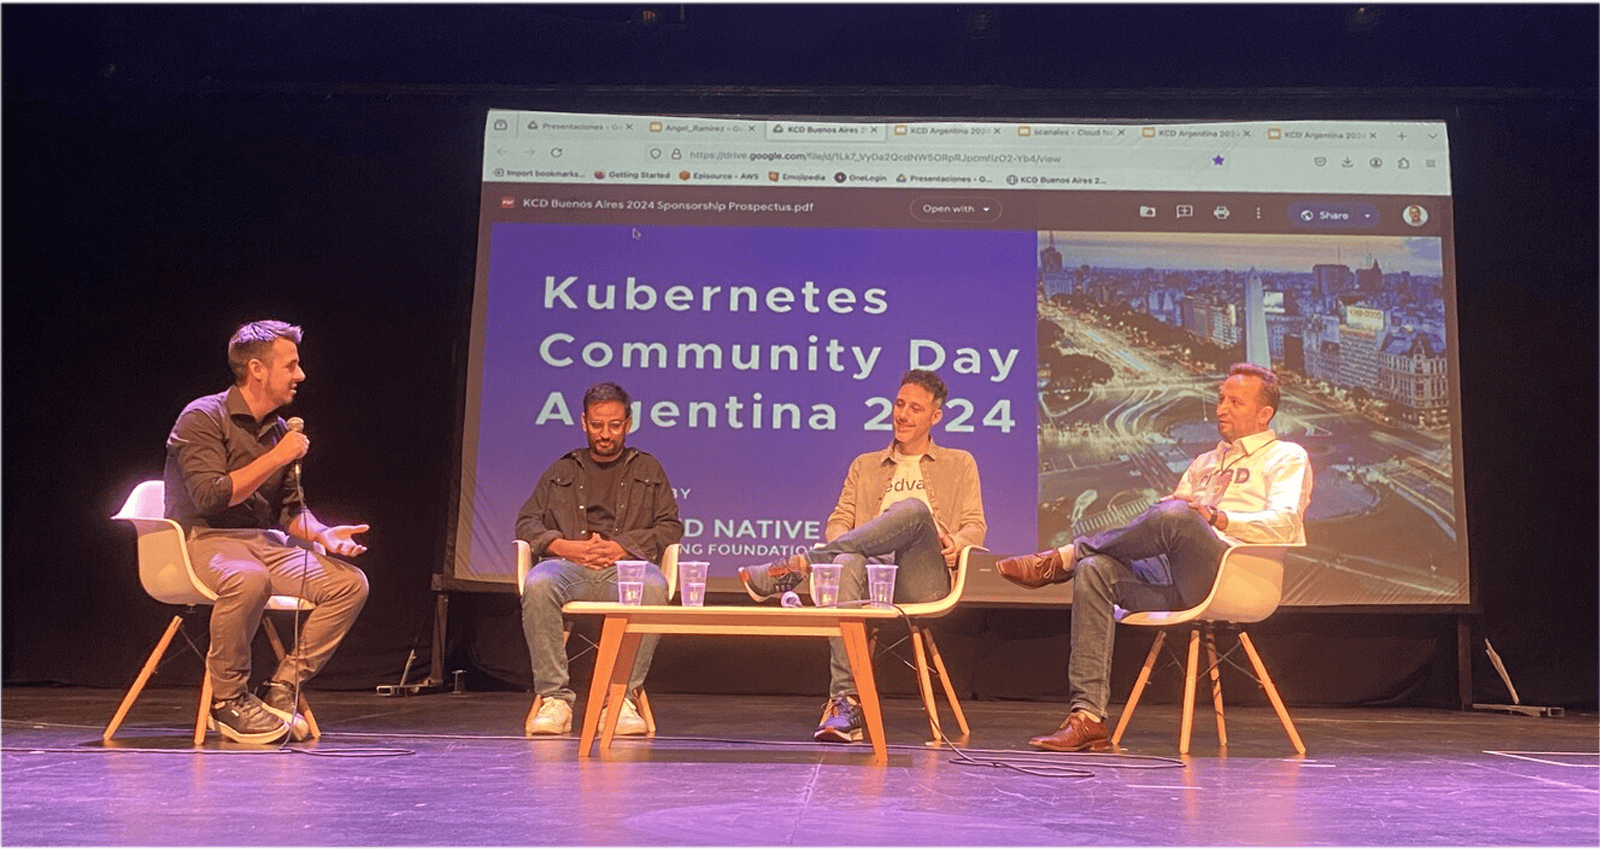 Four speakers on stage for Kubernetes Community Day Argentina 2024